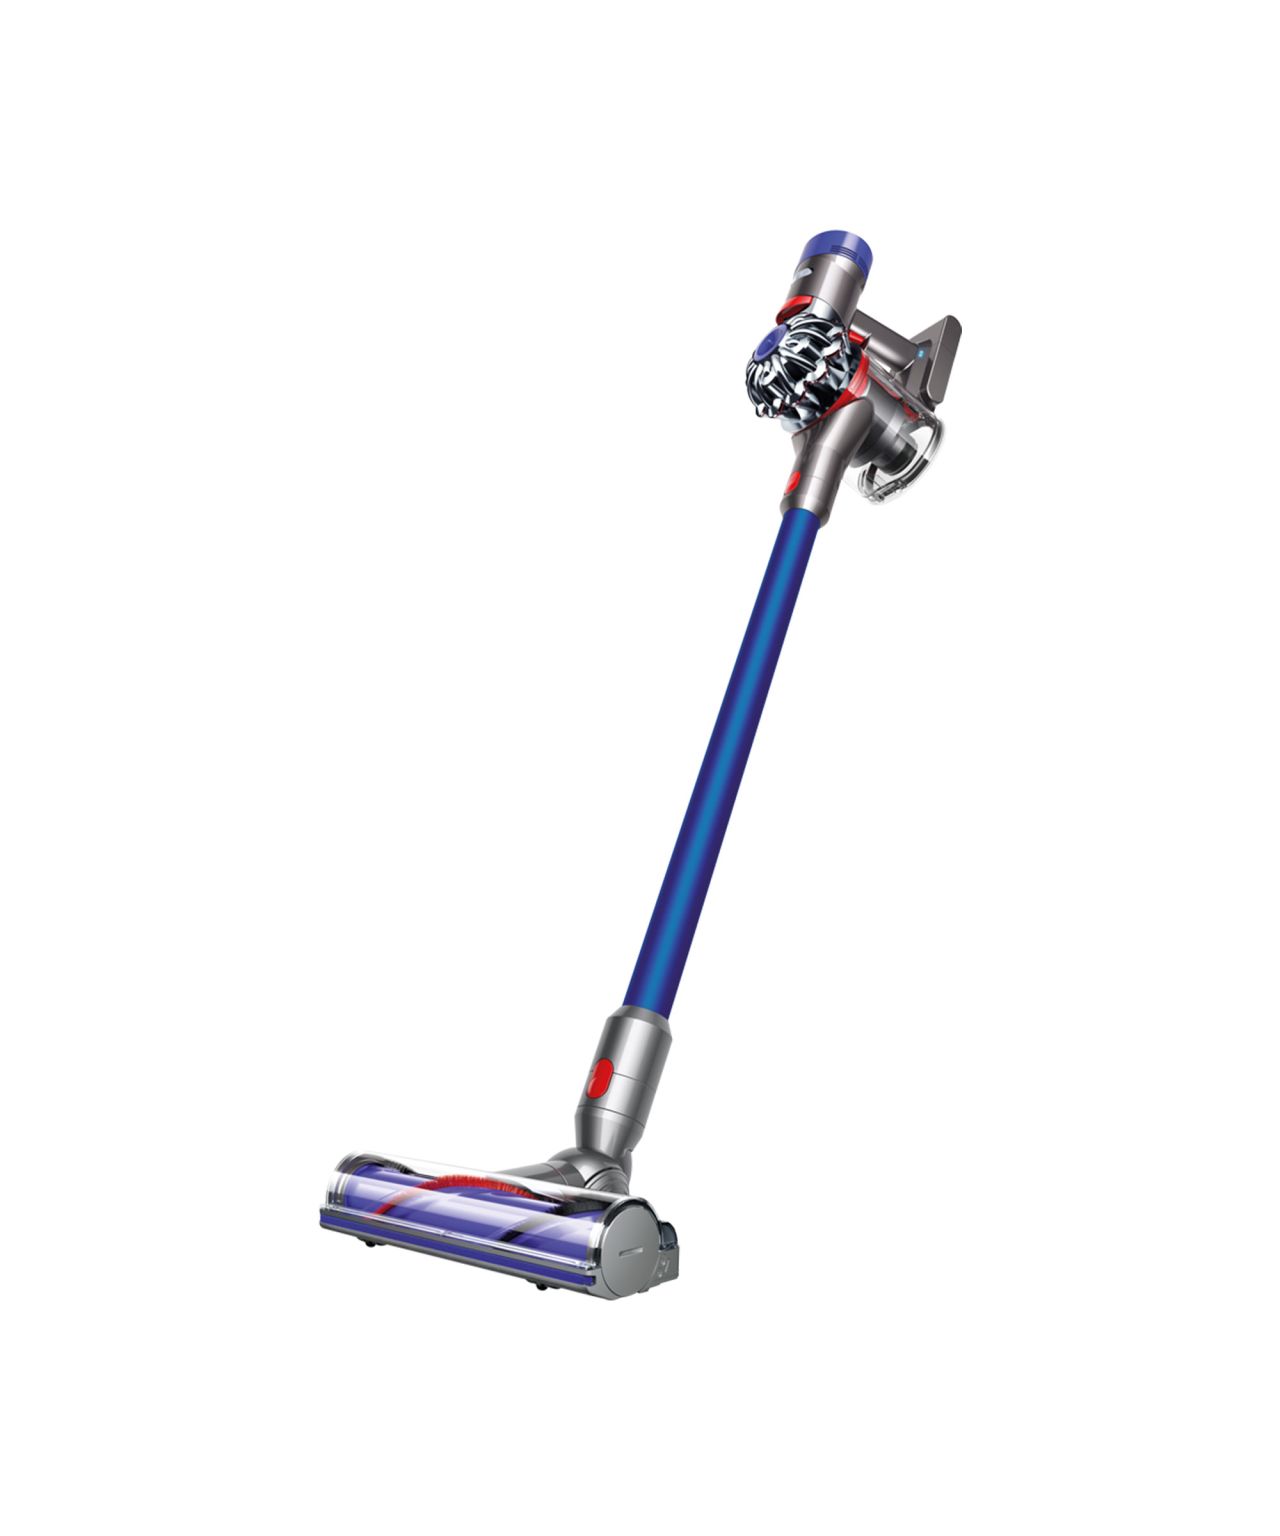 Clean Up This EOFY With up to $400 off Dyson’s Cordless Vacuums